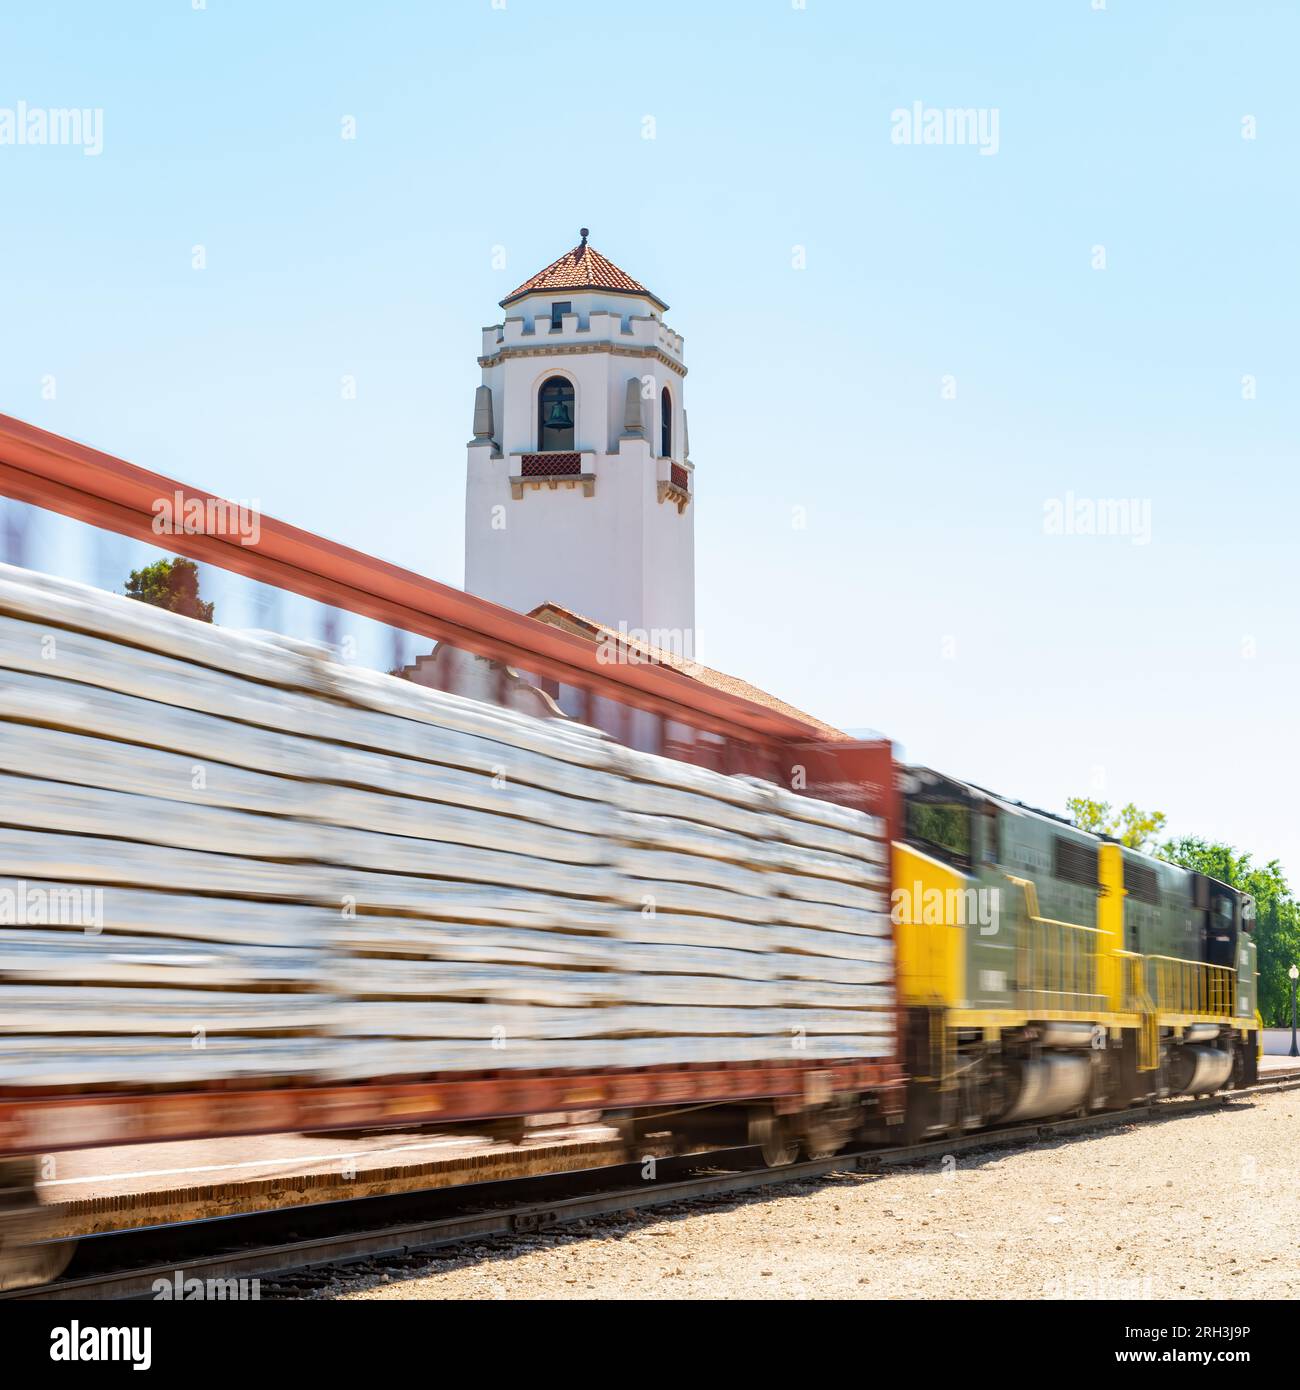 Boise train depot with motion blur train cars pass Stock Photo